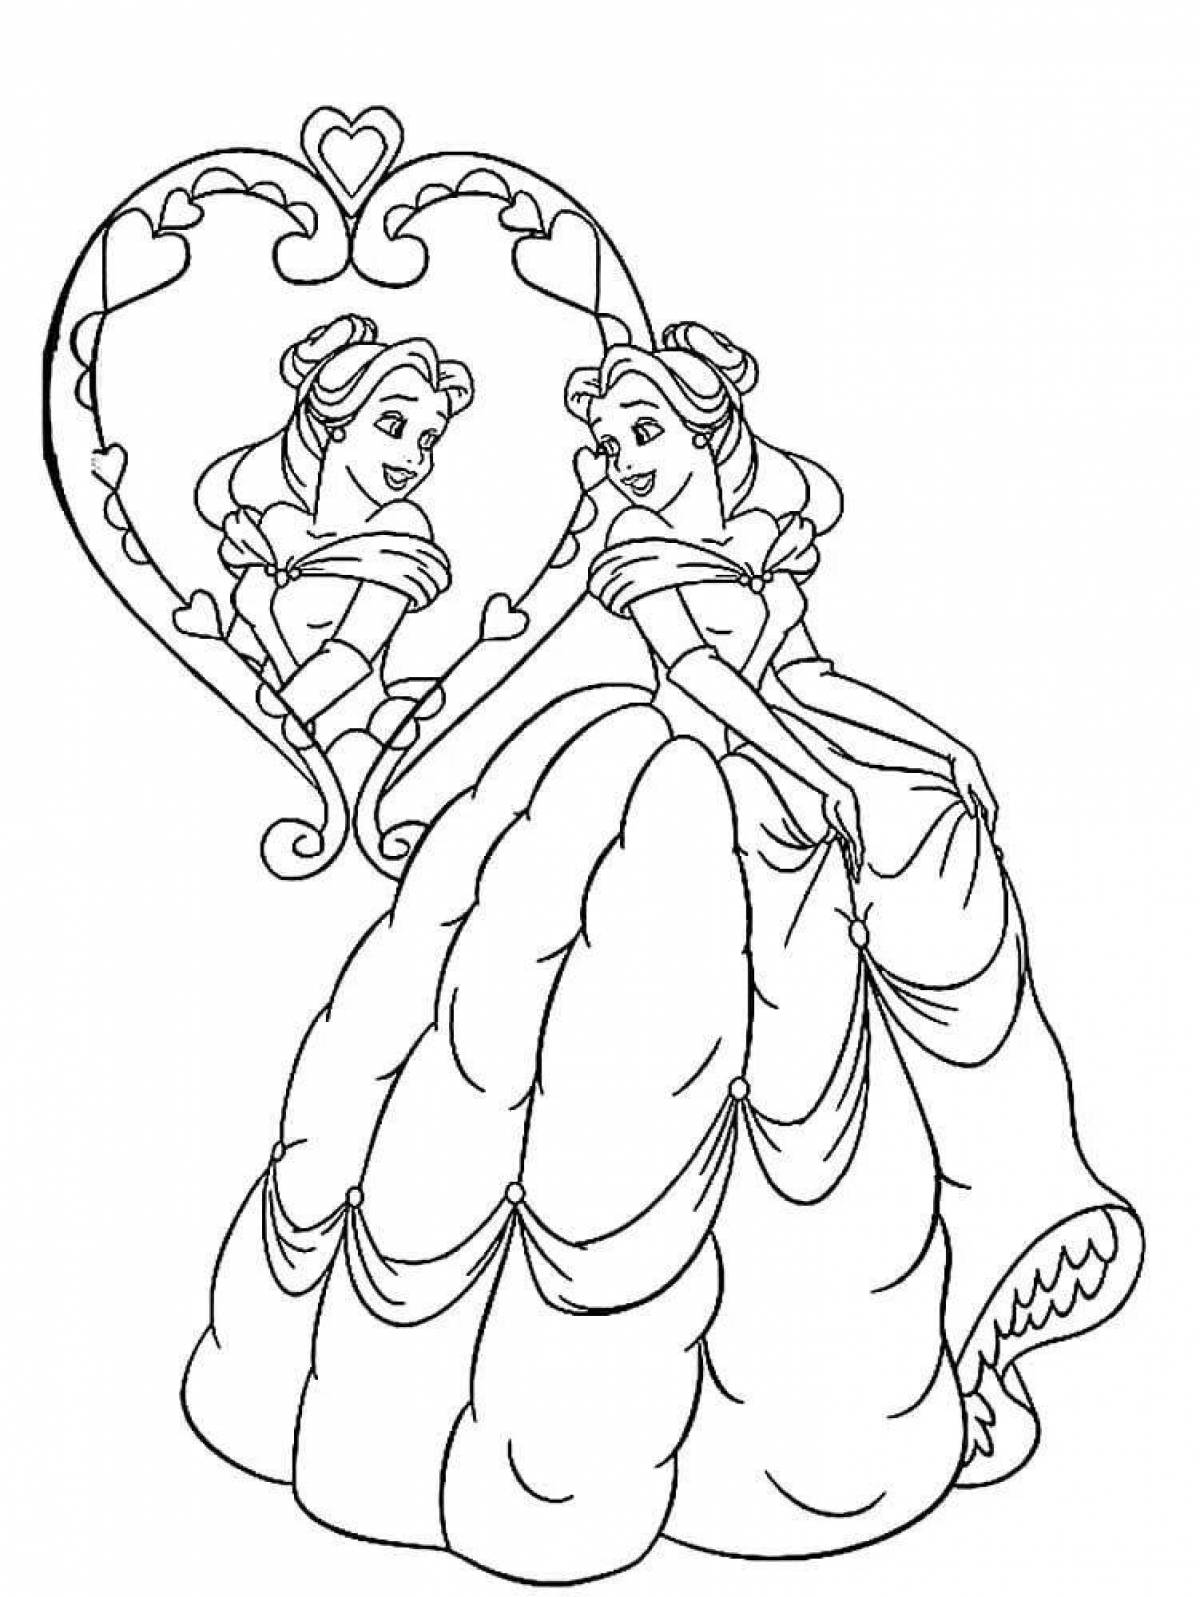 Fun coloring book beauty and the beast for kids